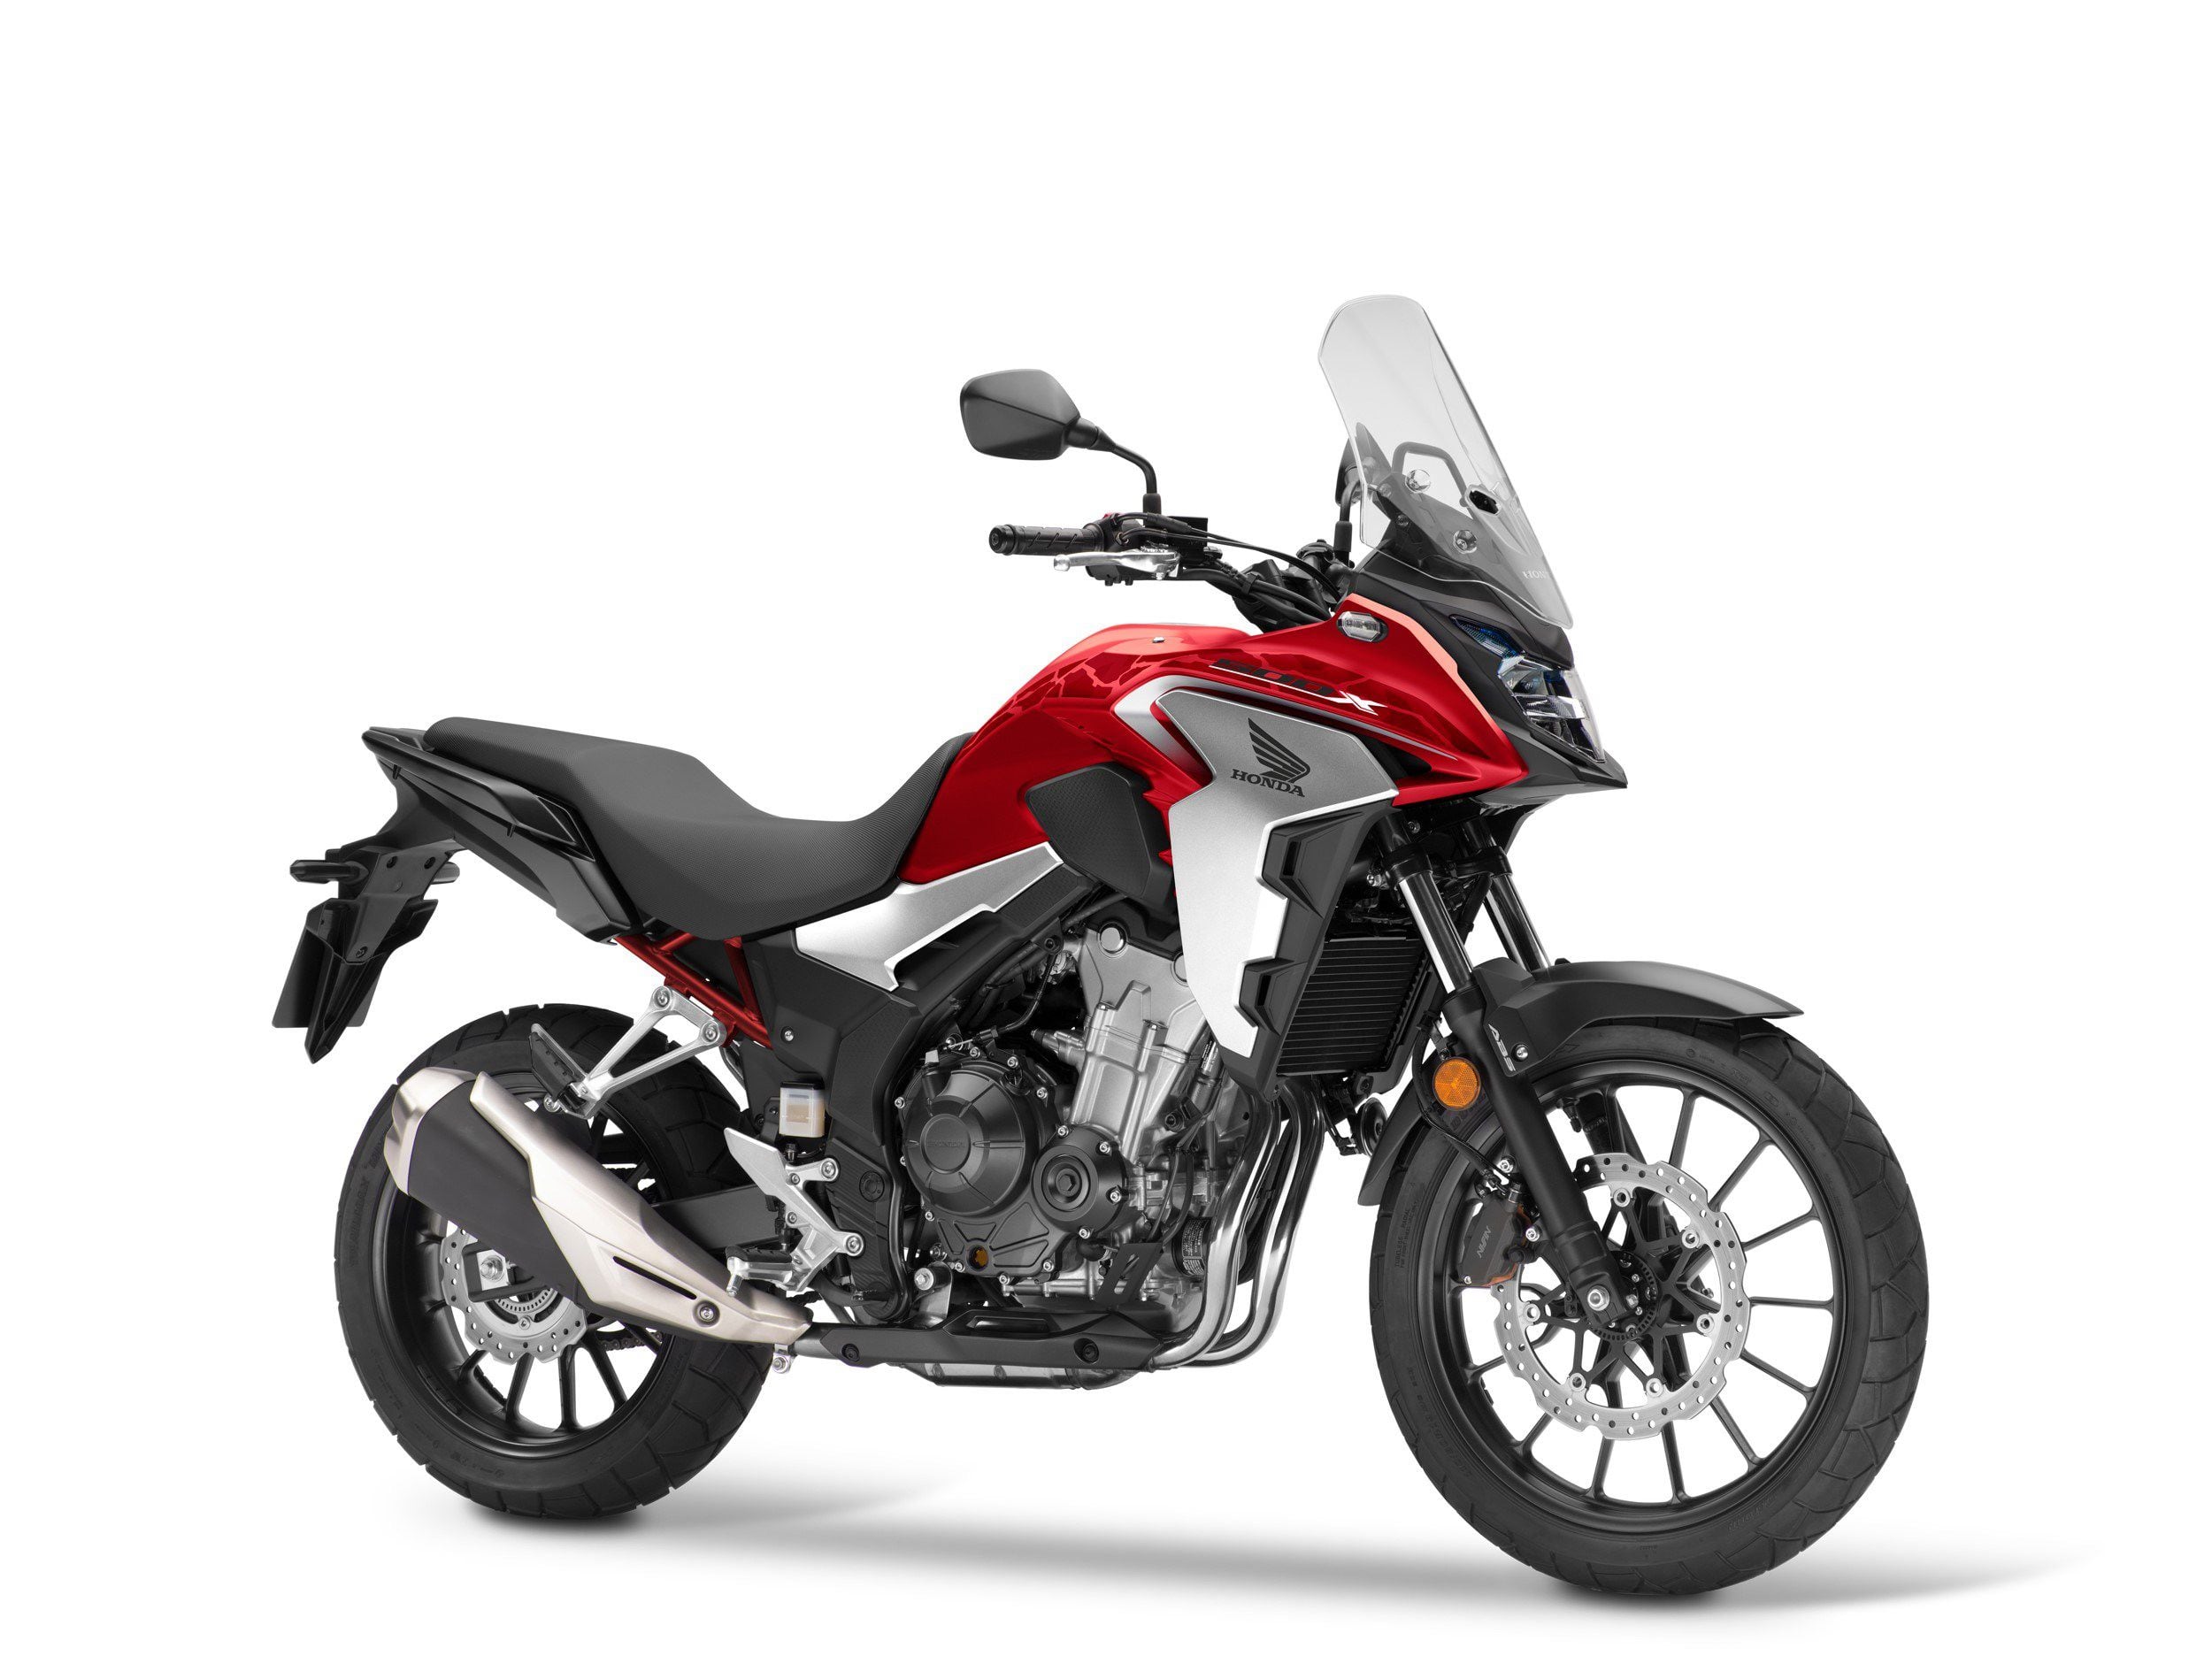 There’s a good chance the CB500X model will also get a larger fuel tank, but there’s been no confirmation as yet.